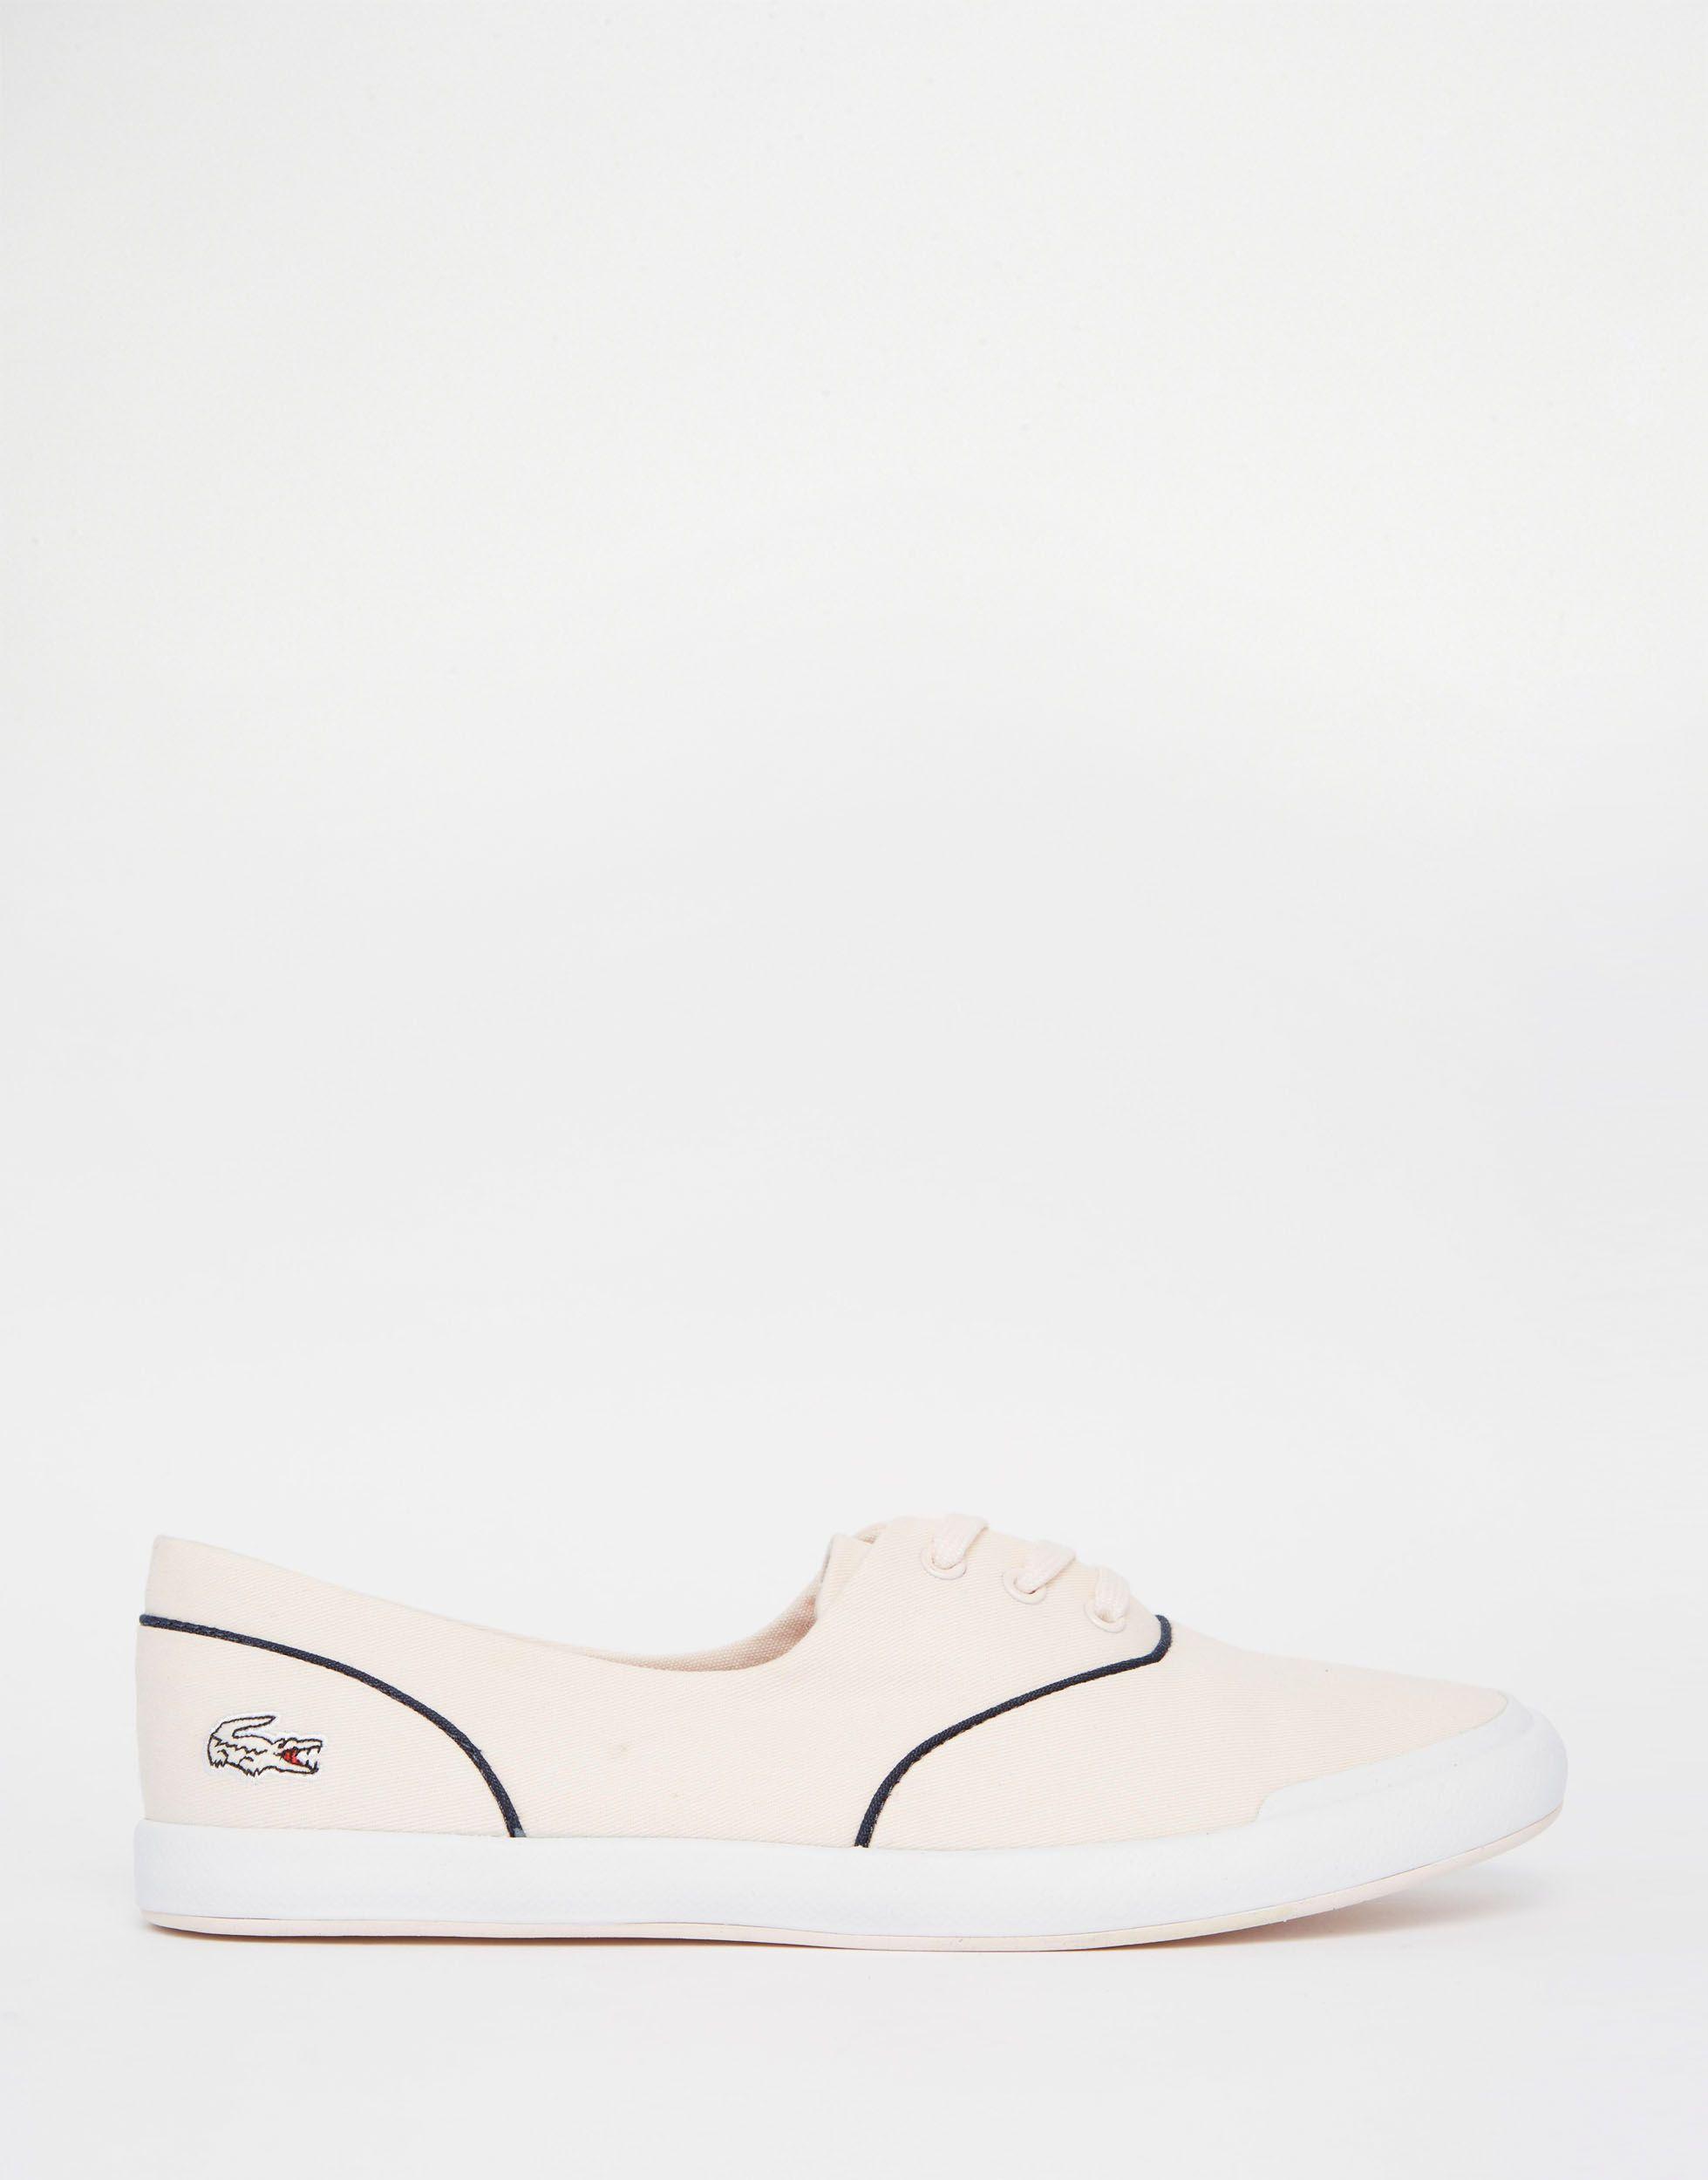 Lacoste Lancelle Nude Lace Up Plimsoll Trainers in Blue | Lyst